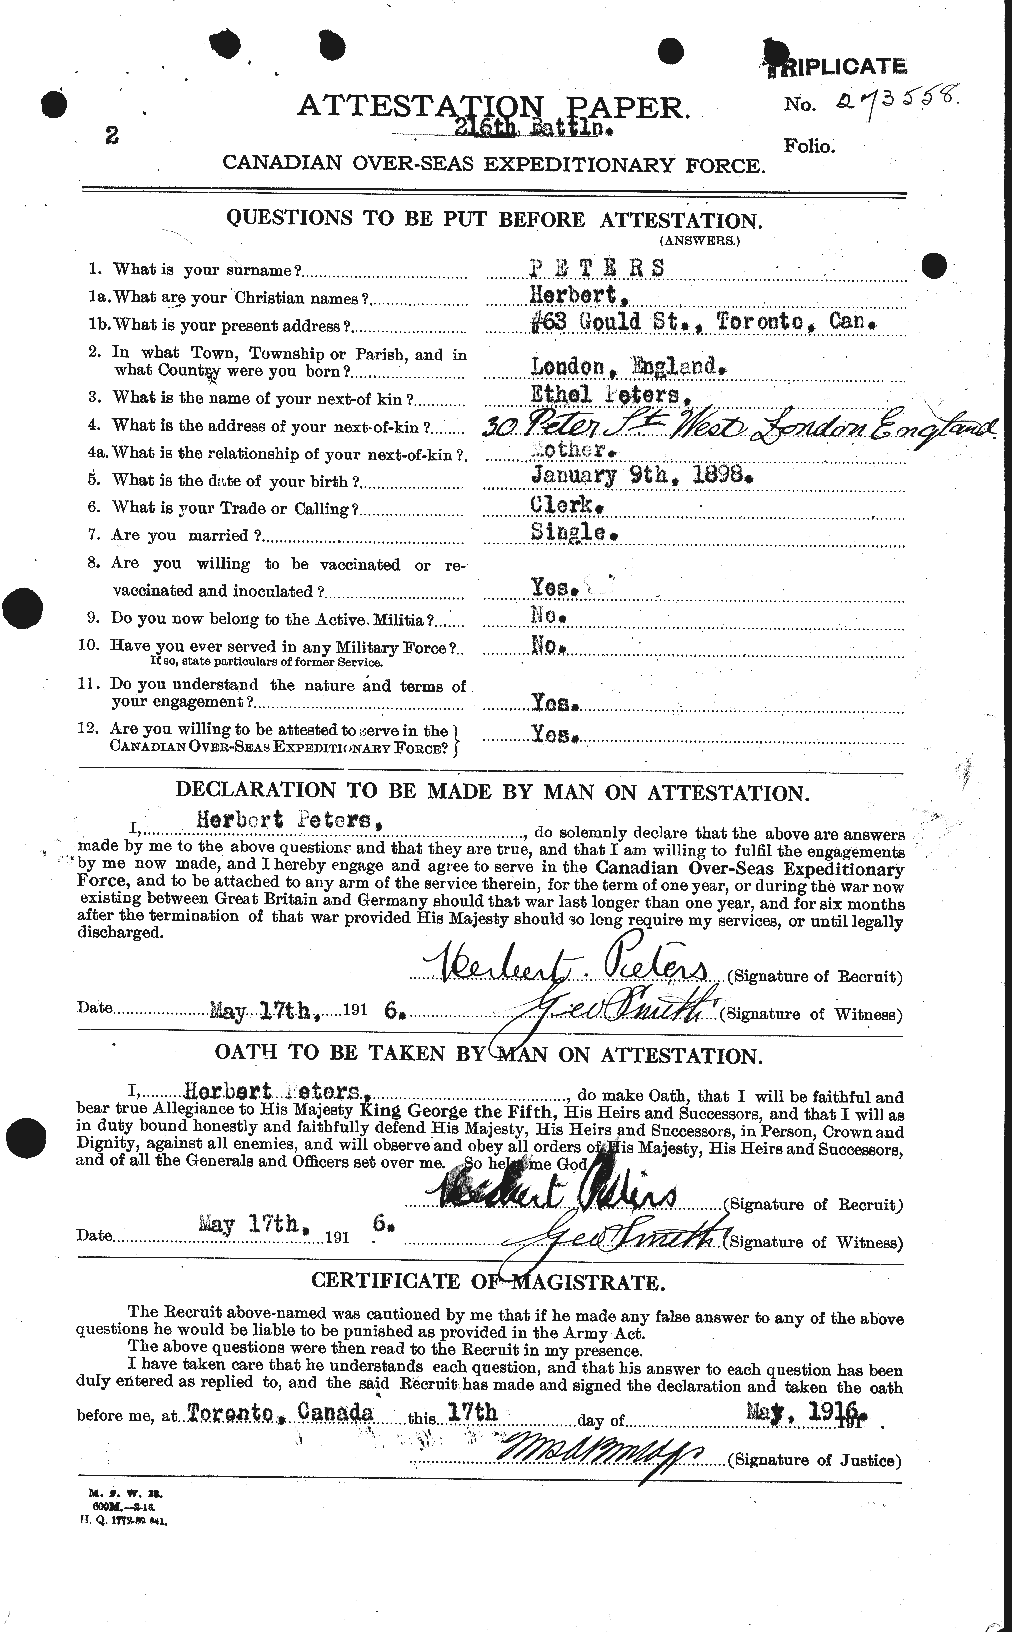 Personnel Records of the First World War - CEF 575496a